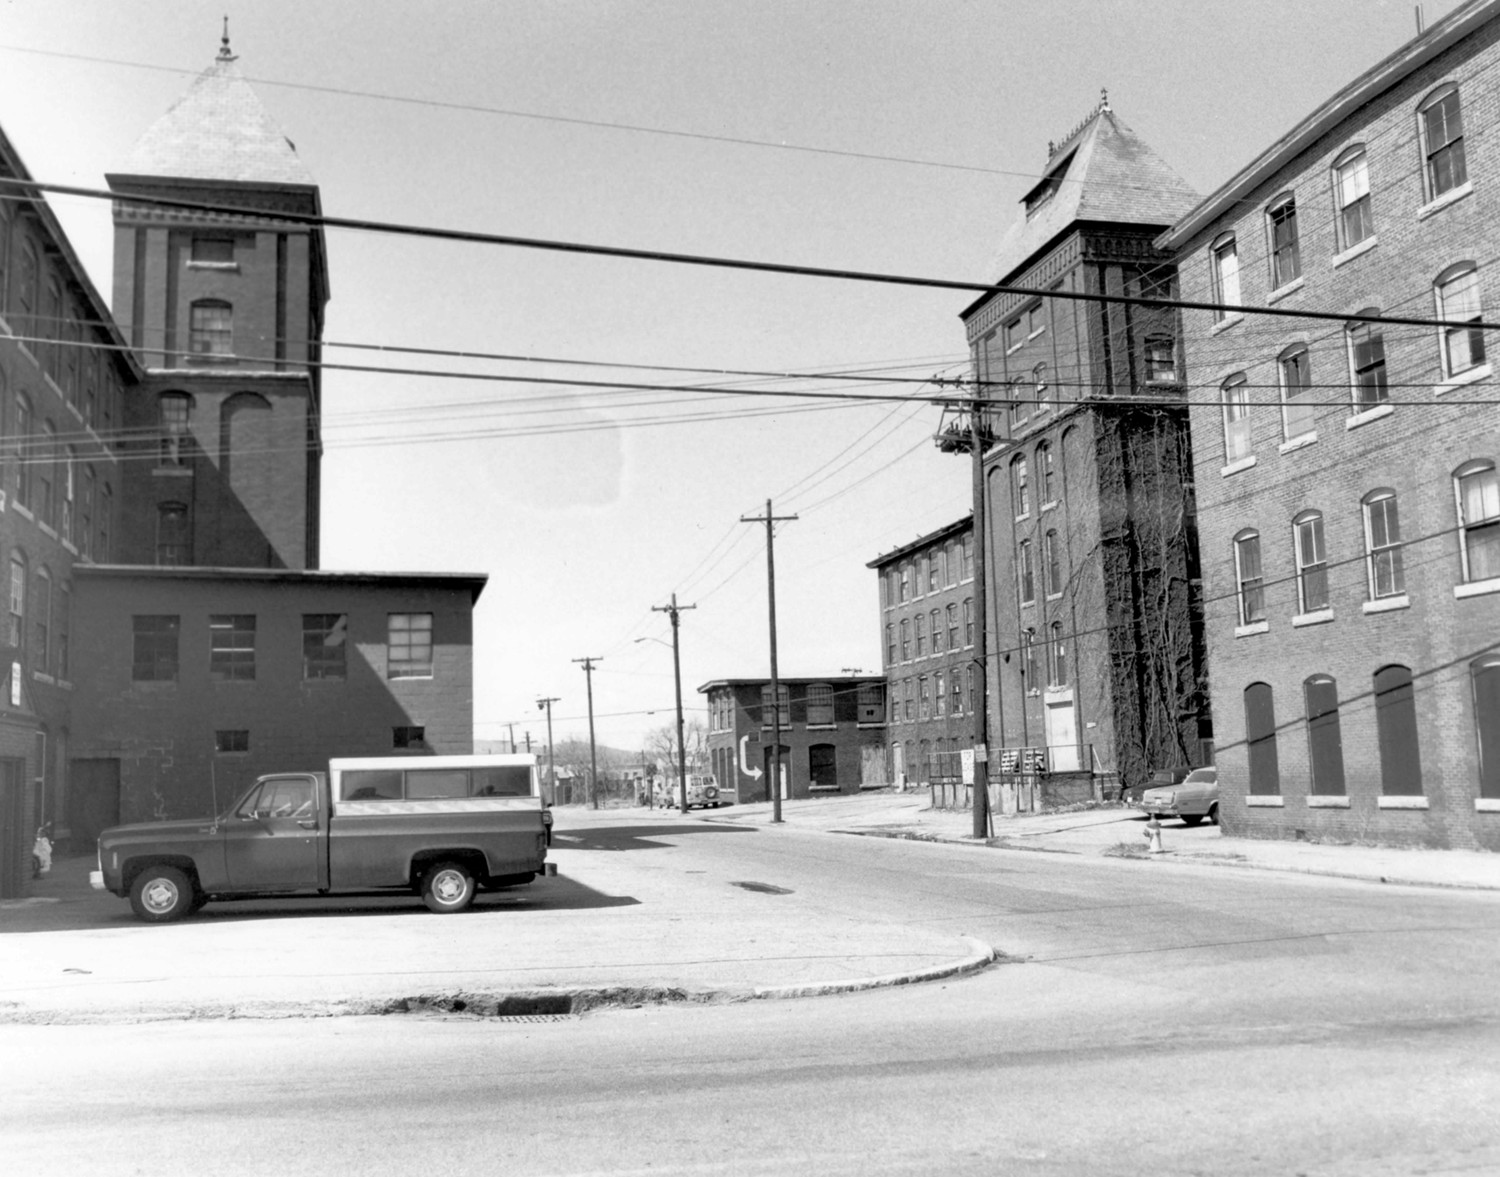 Hoyt Shoe Company Factory, Manchester New Hampshire Looking west at Factory 1 on right and Factory 2 on left (1985)